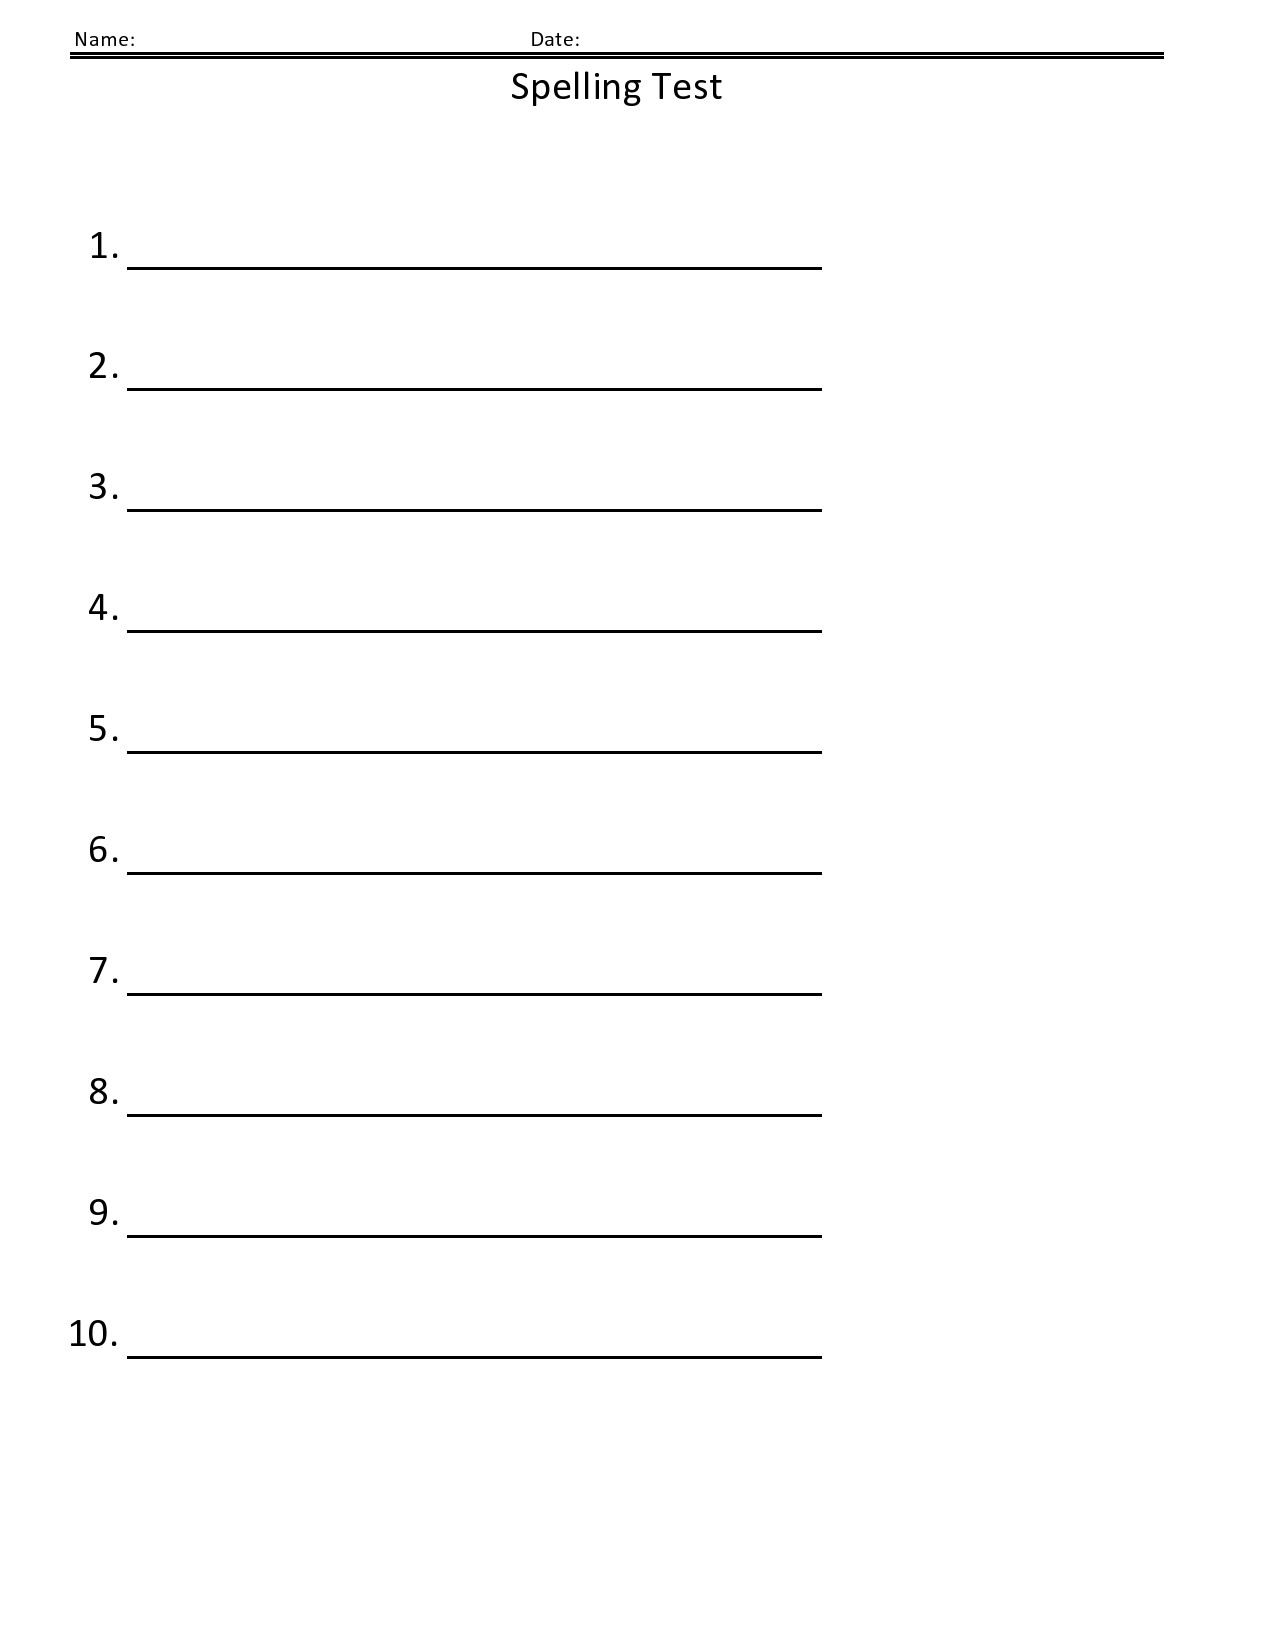 Free spelling test template 10